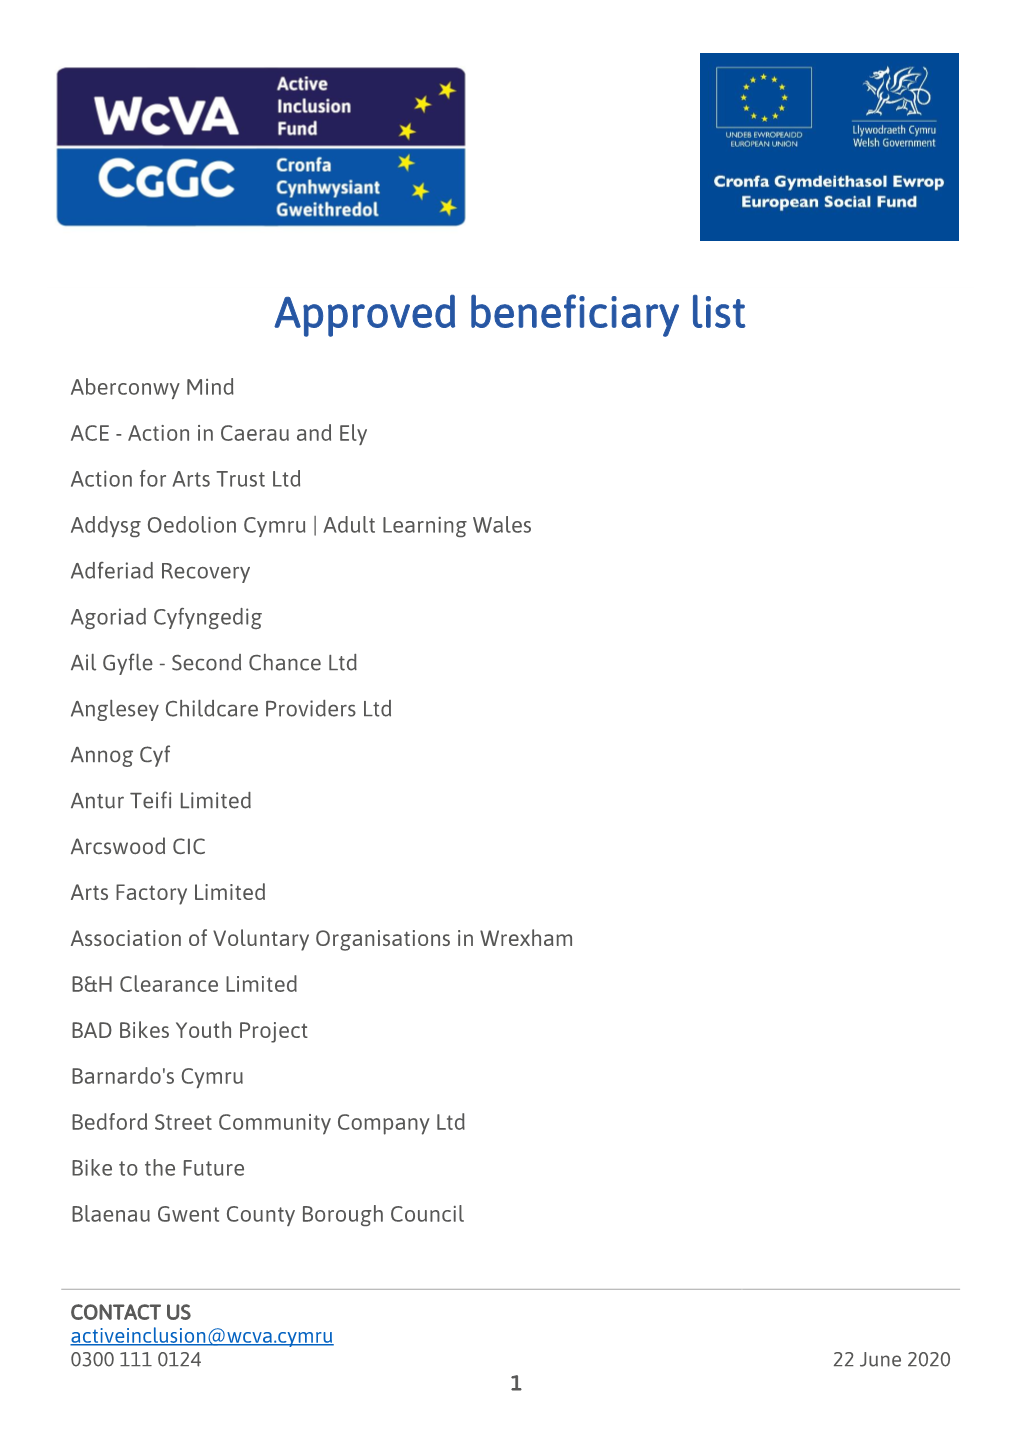 Approved Beneficiary List